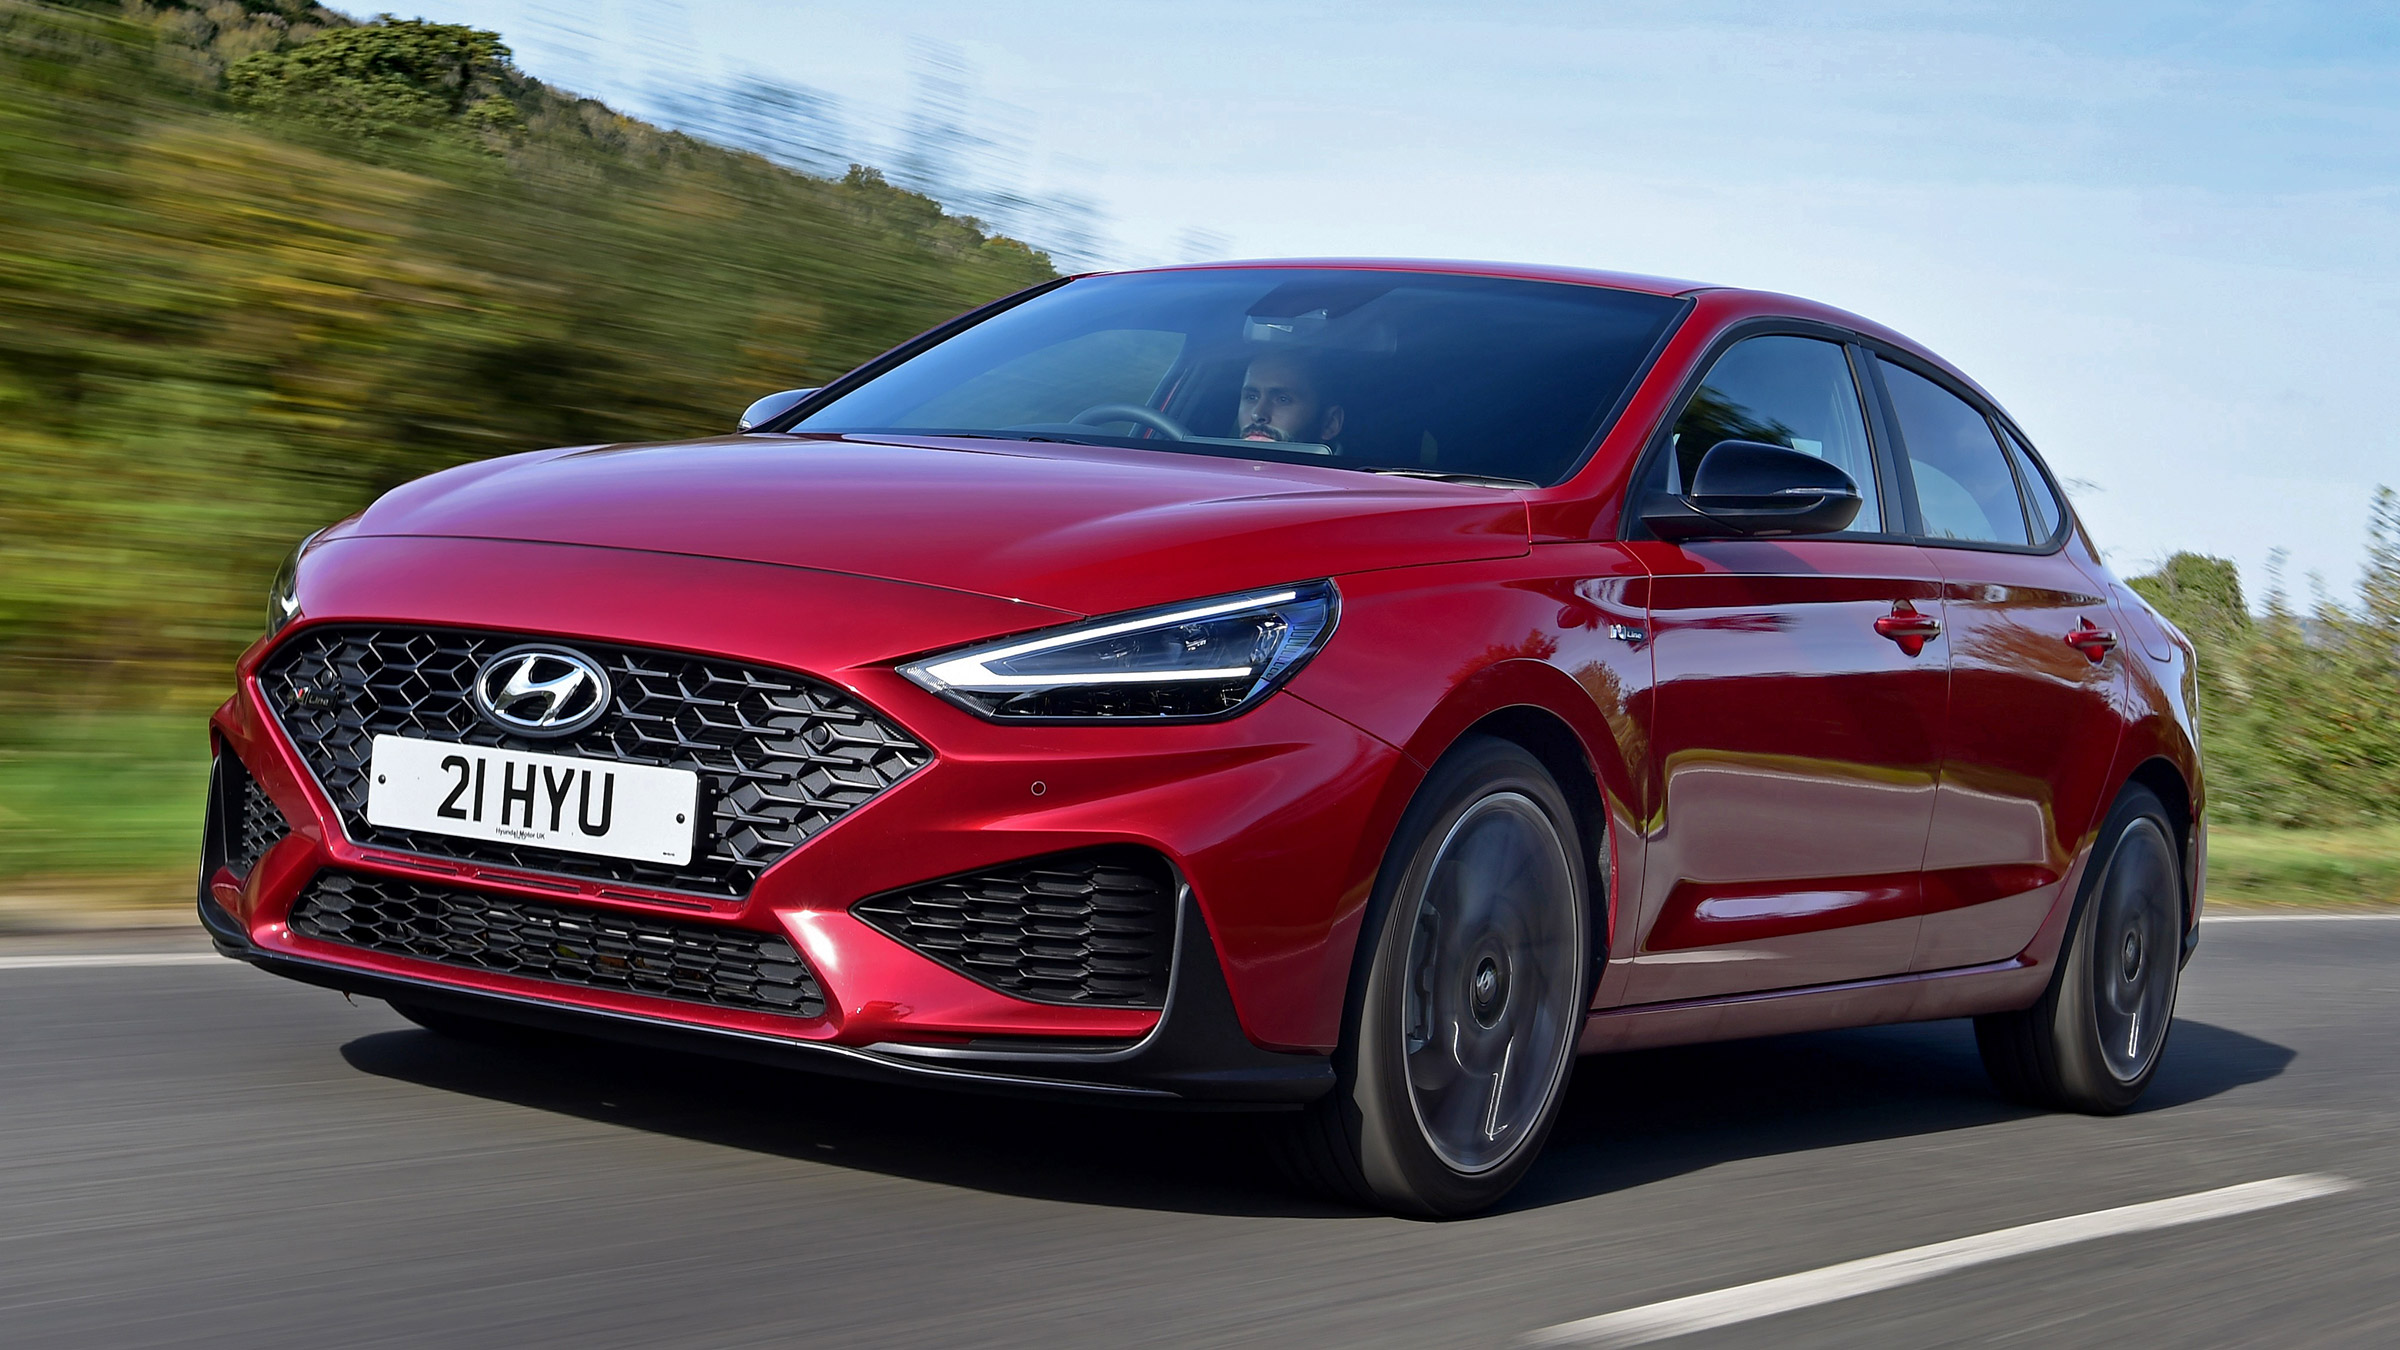 Hyundai i30 Fastback N (2019) review: grown-up hot hatch